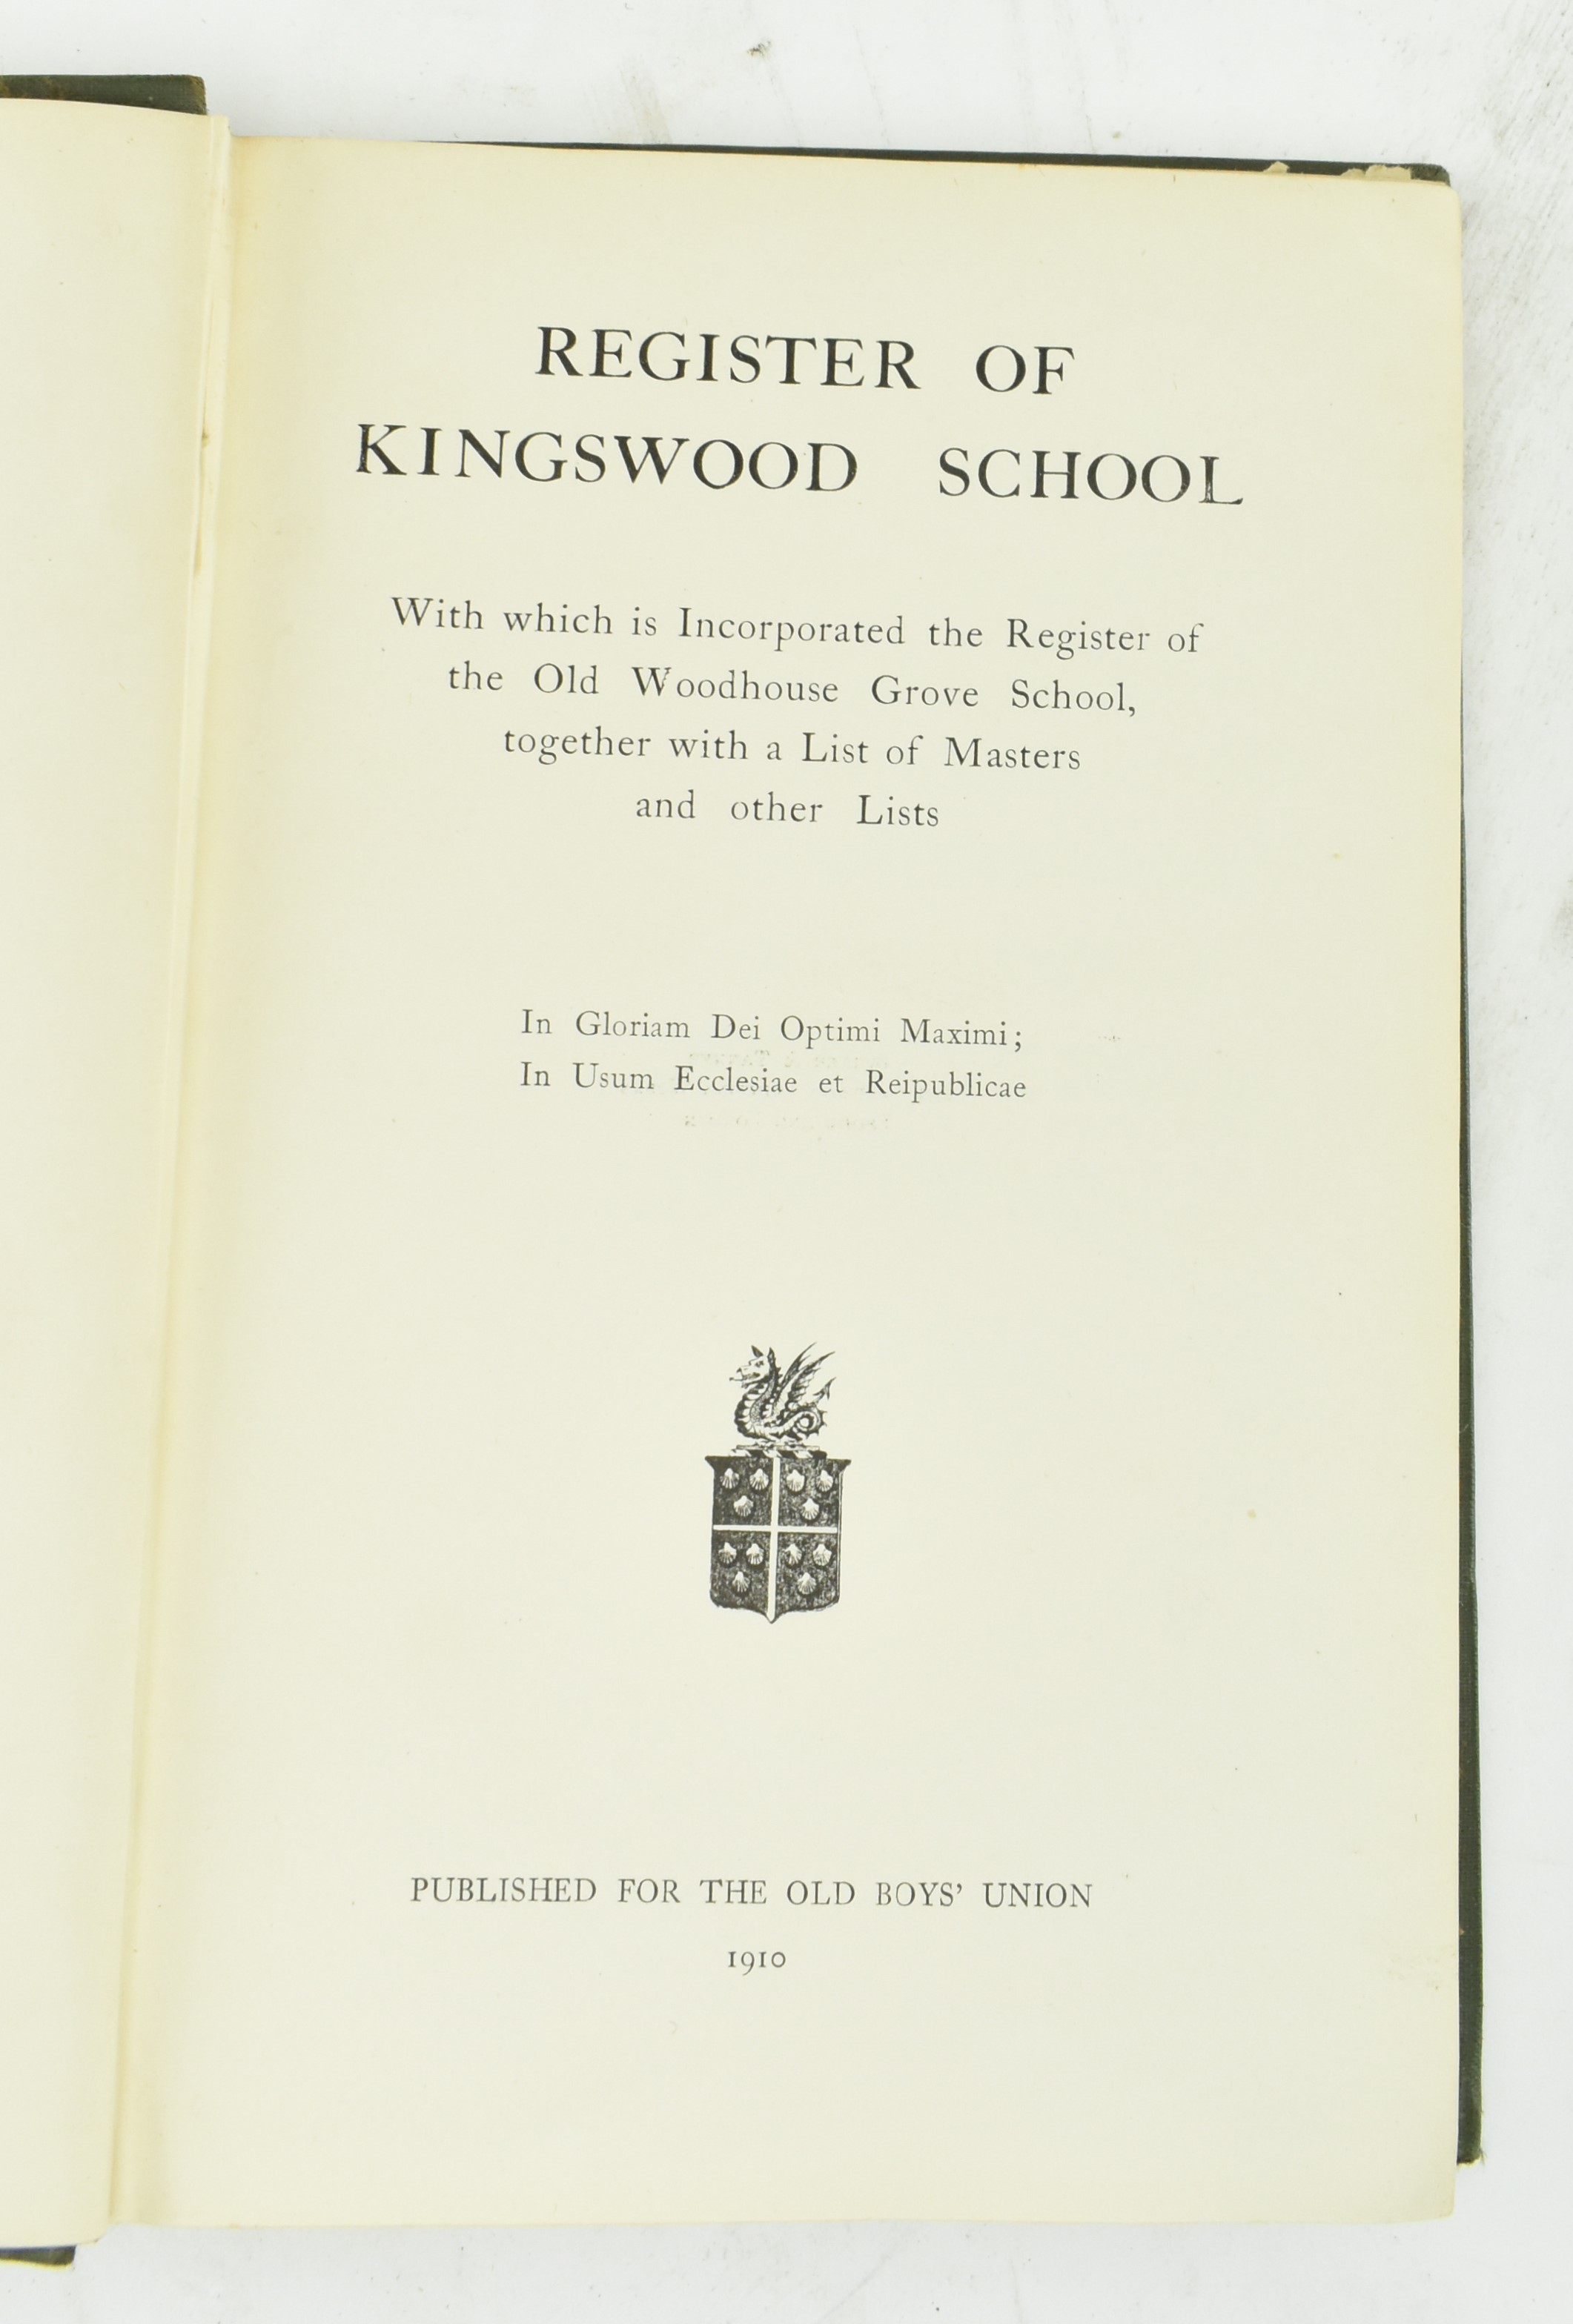 LOCAL BATH INTEREST - FOUR REGISTERS OF KINGSWOOD SCHOOL - Image 7 of 8